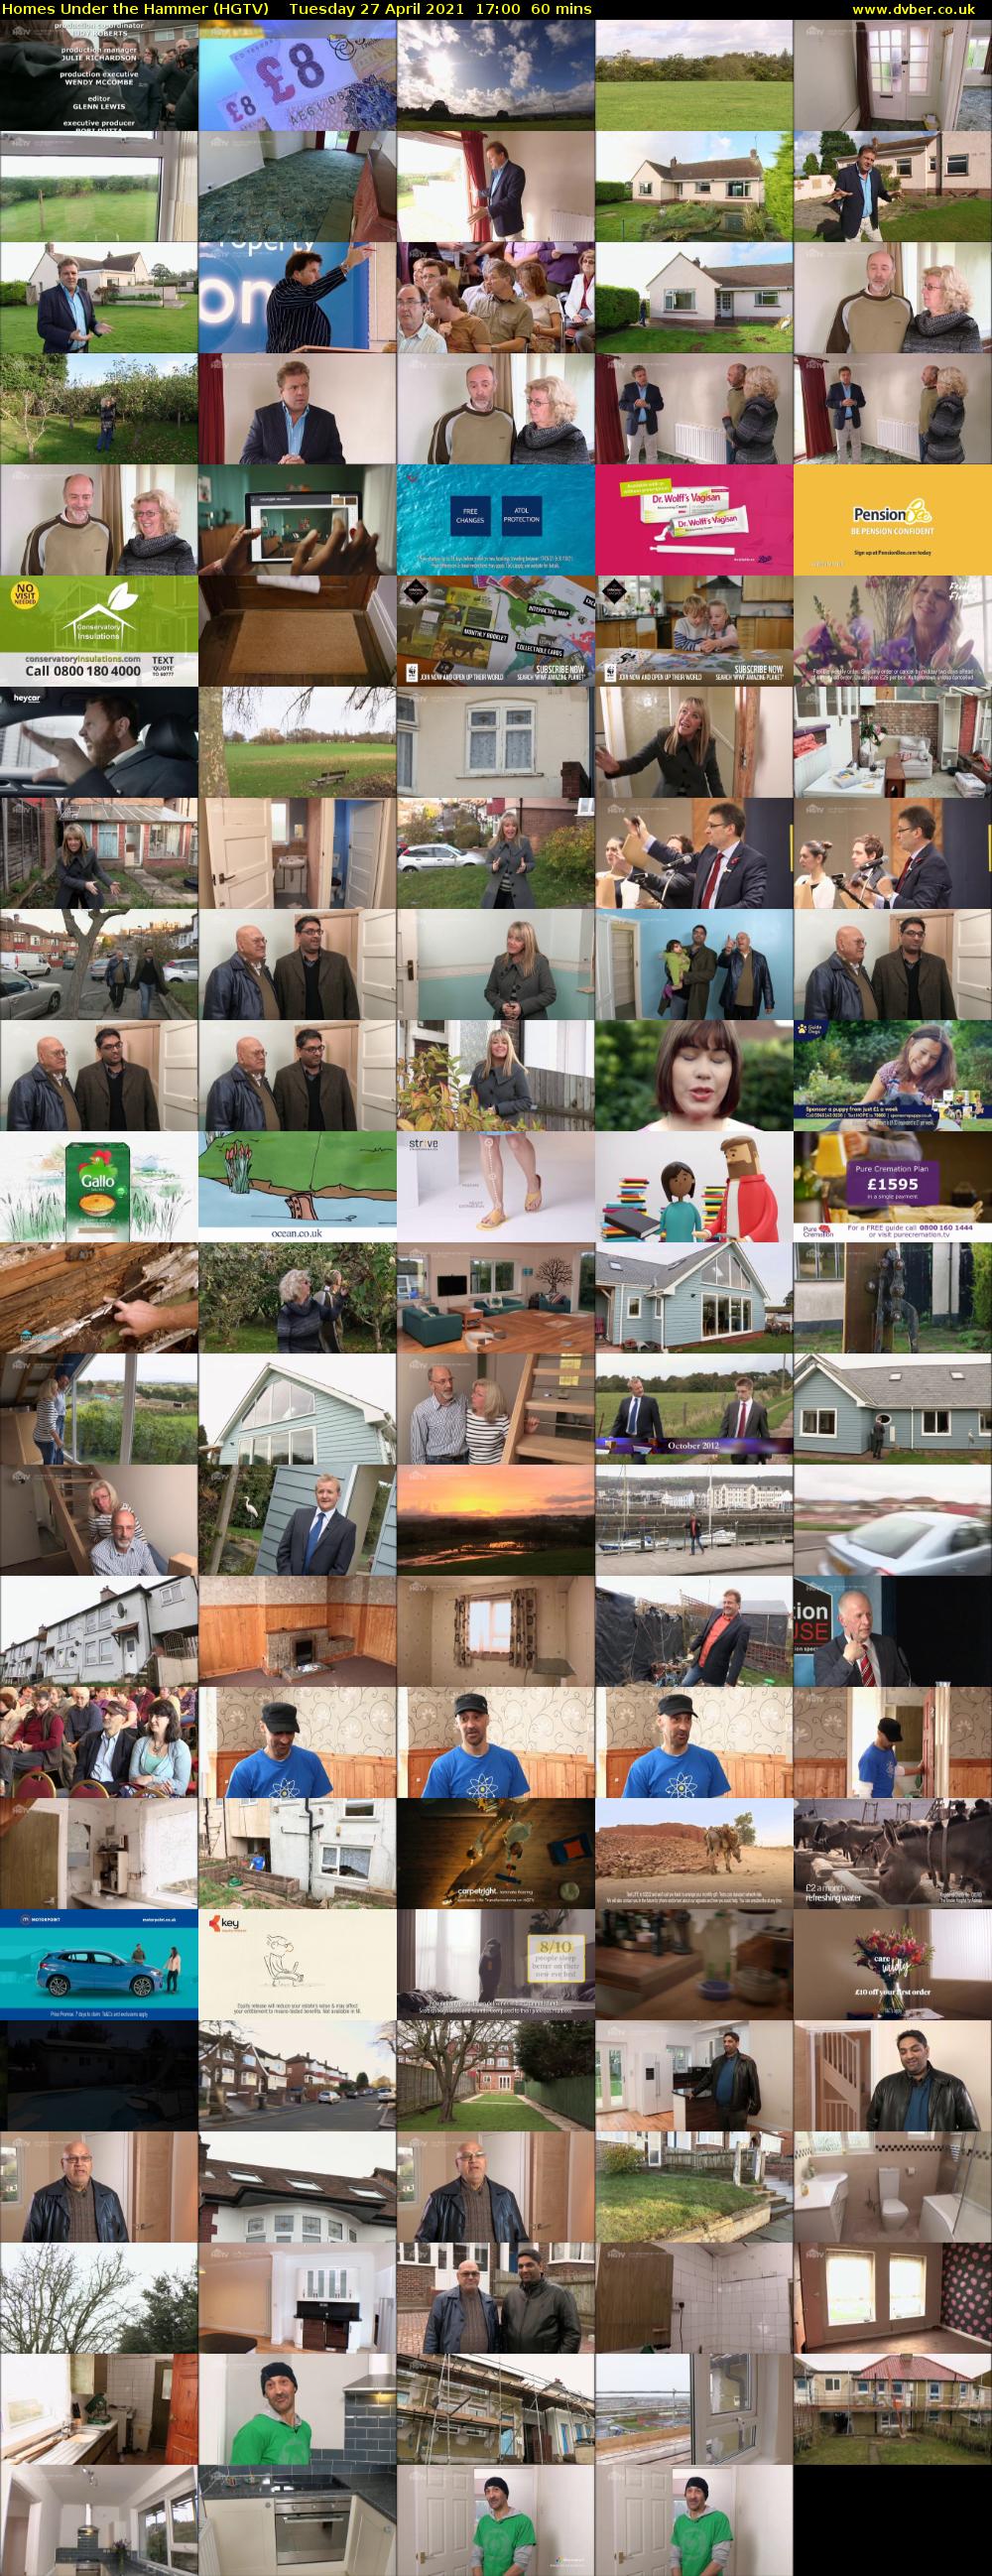 Homes Under the Hammer (HGTV) Tuesday 27 April 2021 17:00 - 18:00